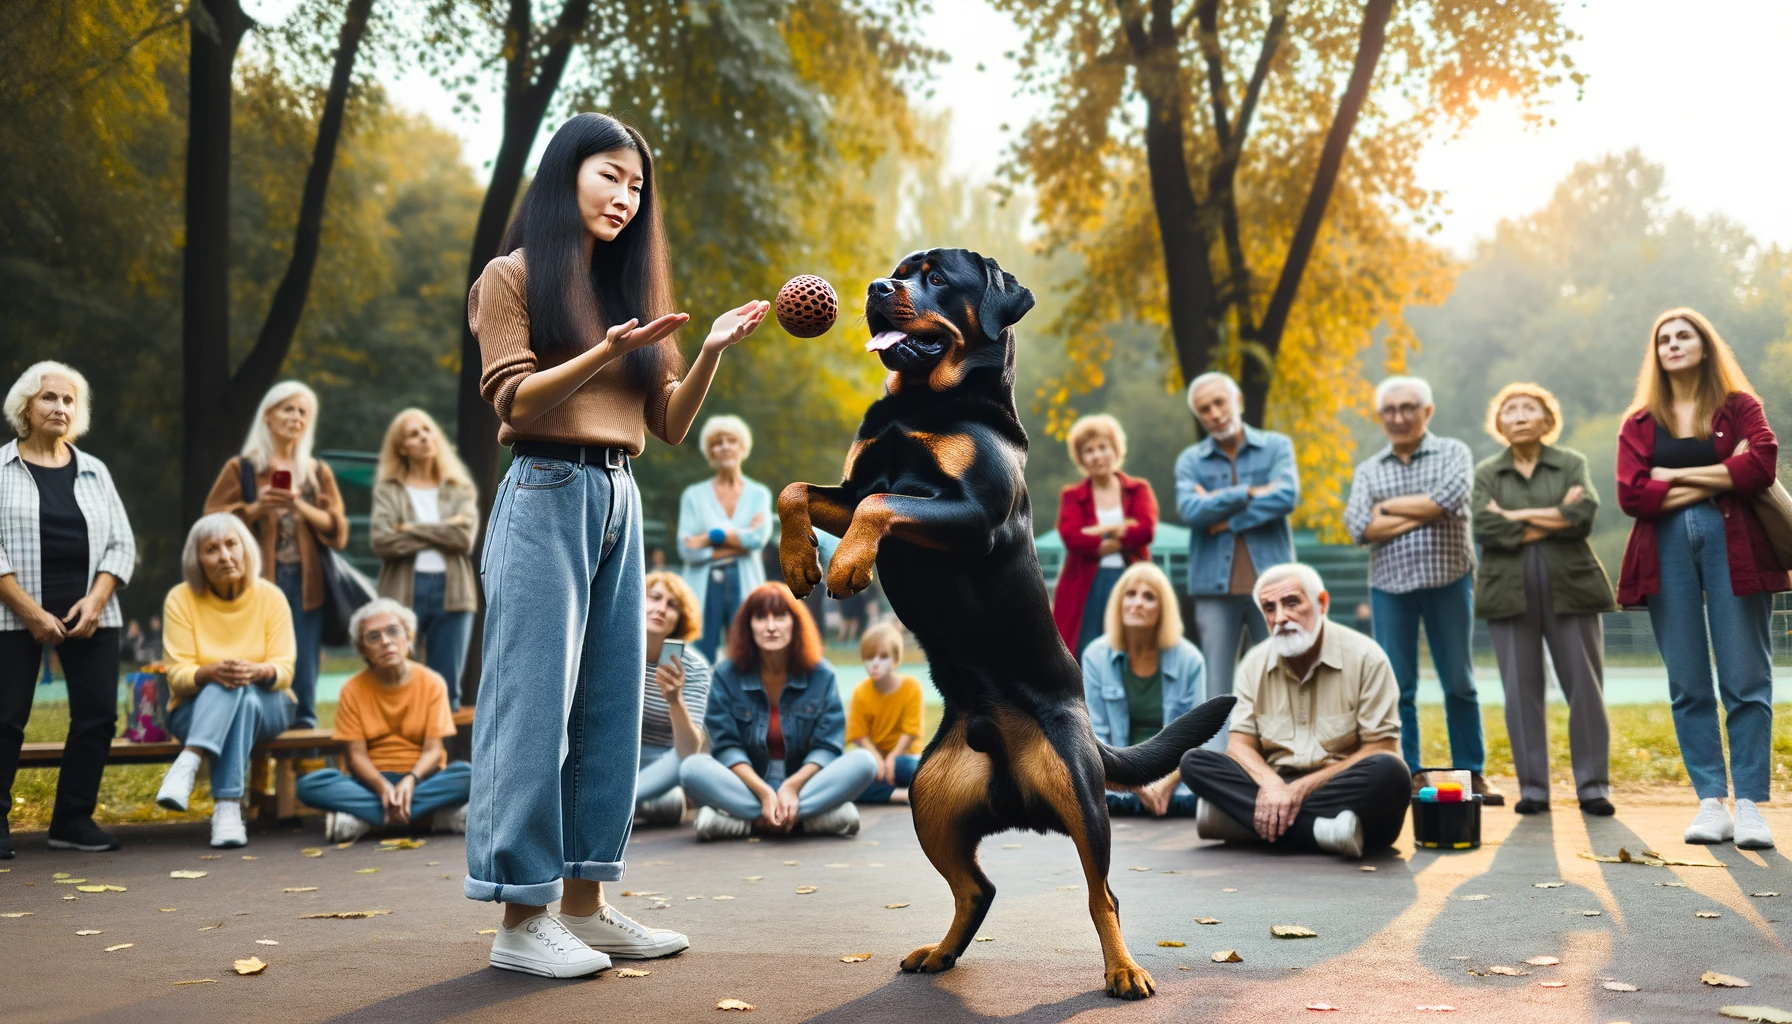 A Labrador Rottweiler Mix nailing a complicated trick, showing off its smarts but also hinting at the challenge of keeping such an intelligent dog engaged.